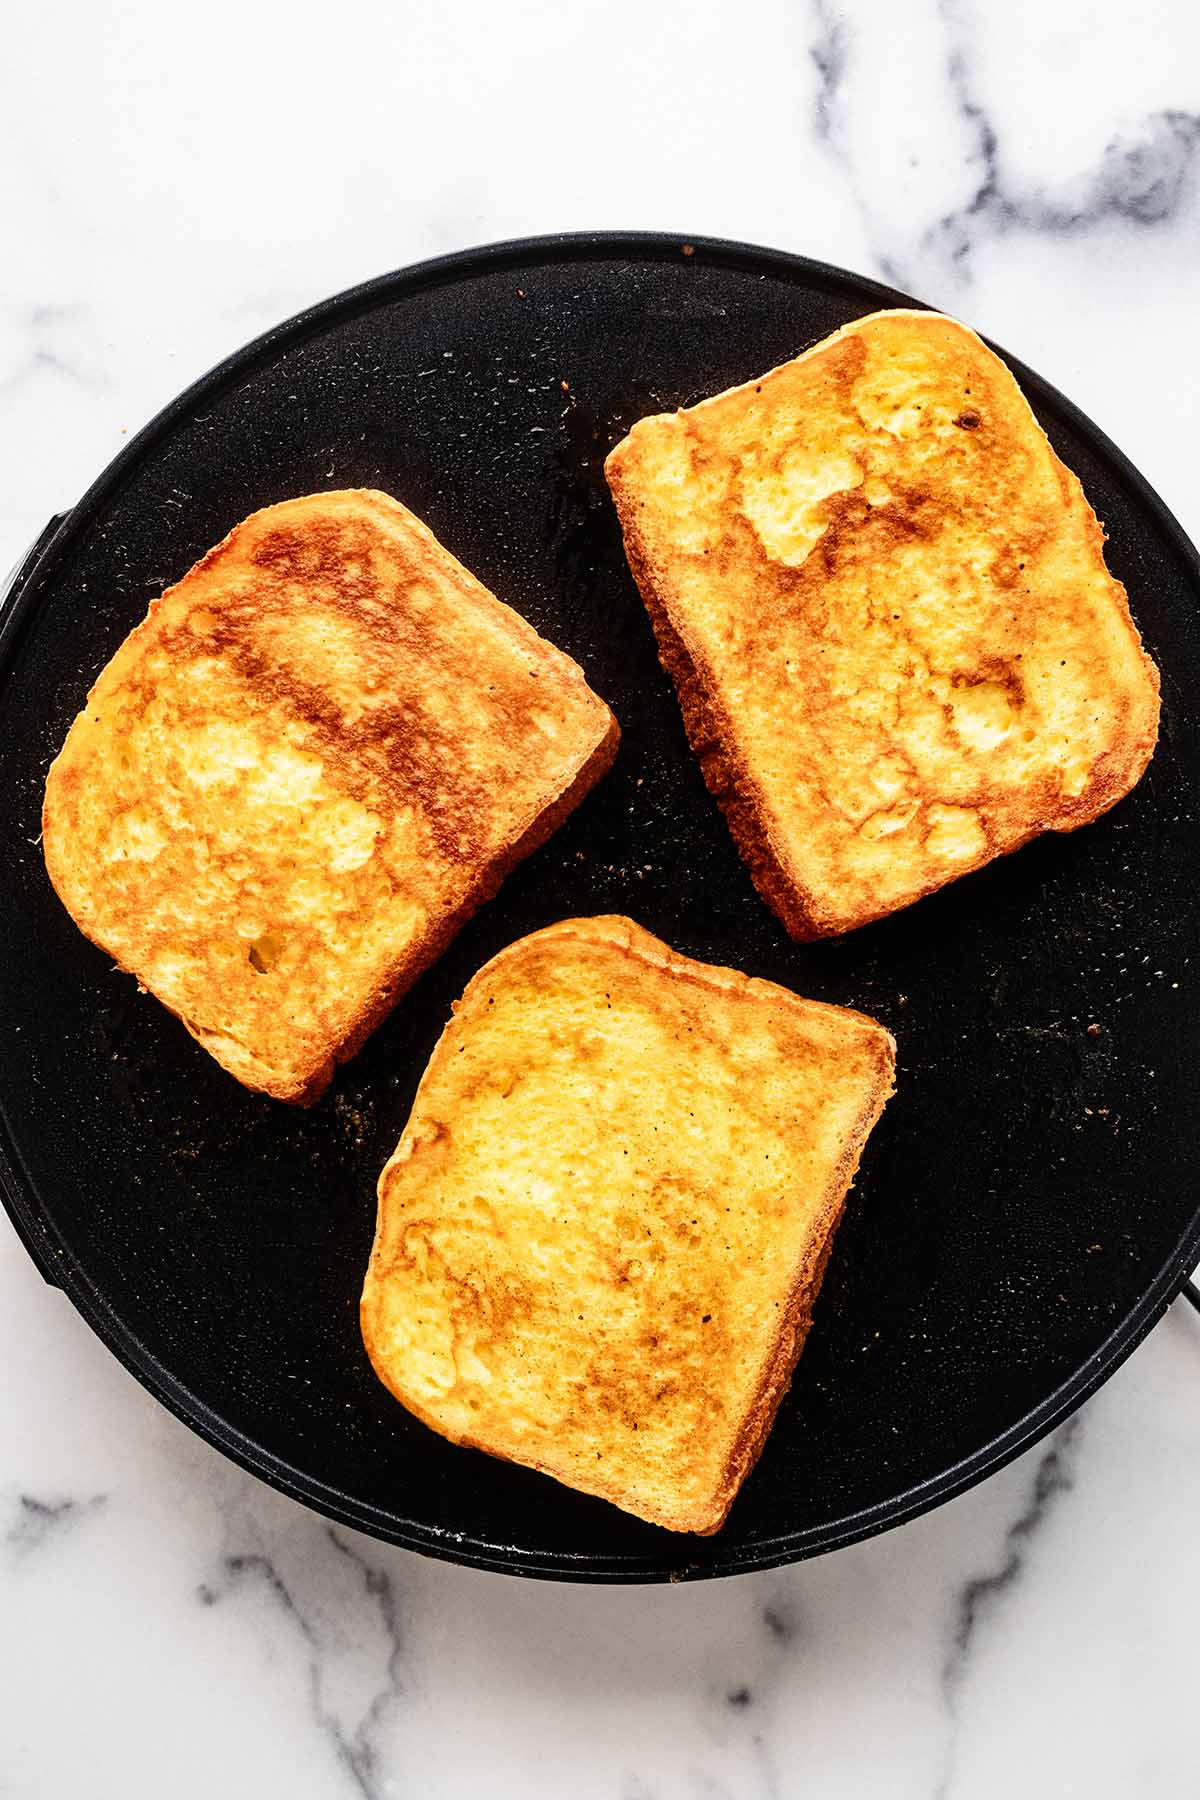 Overhead view of French toast cooking on a griddle